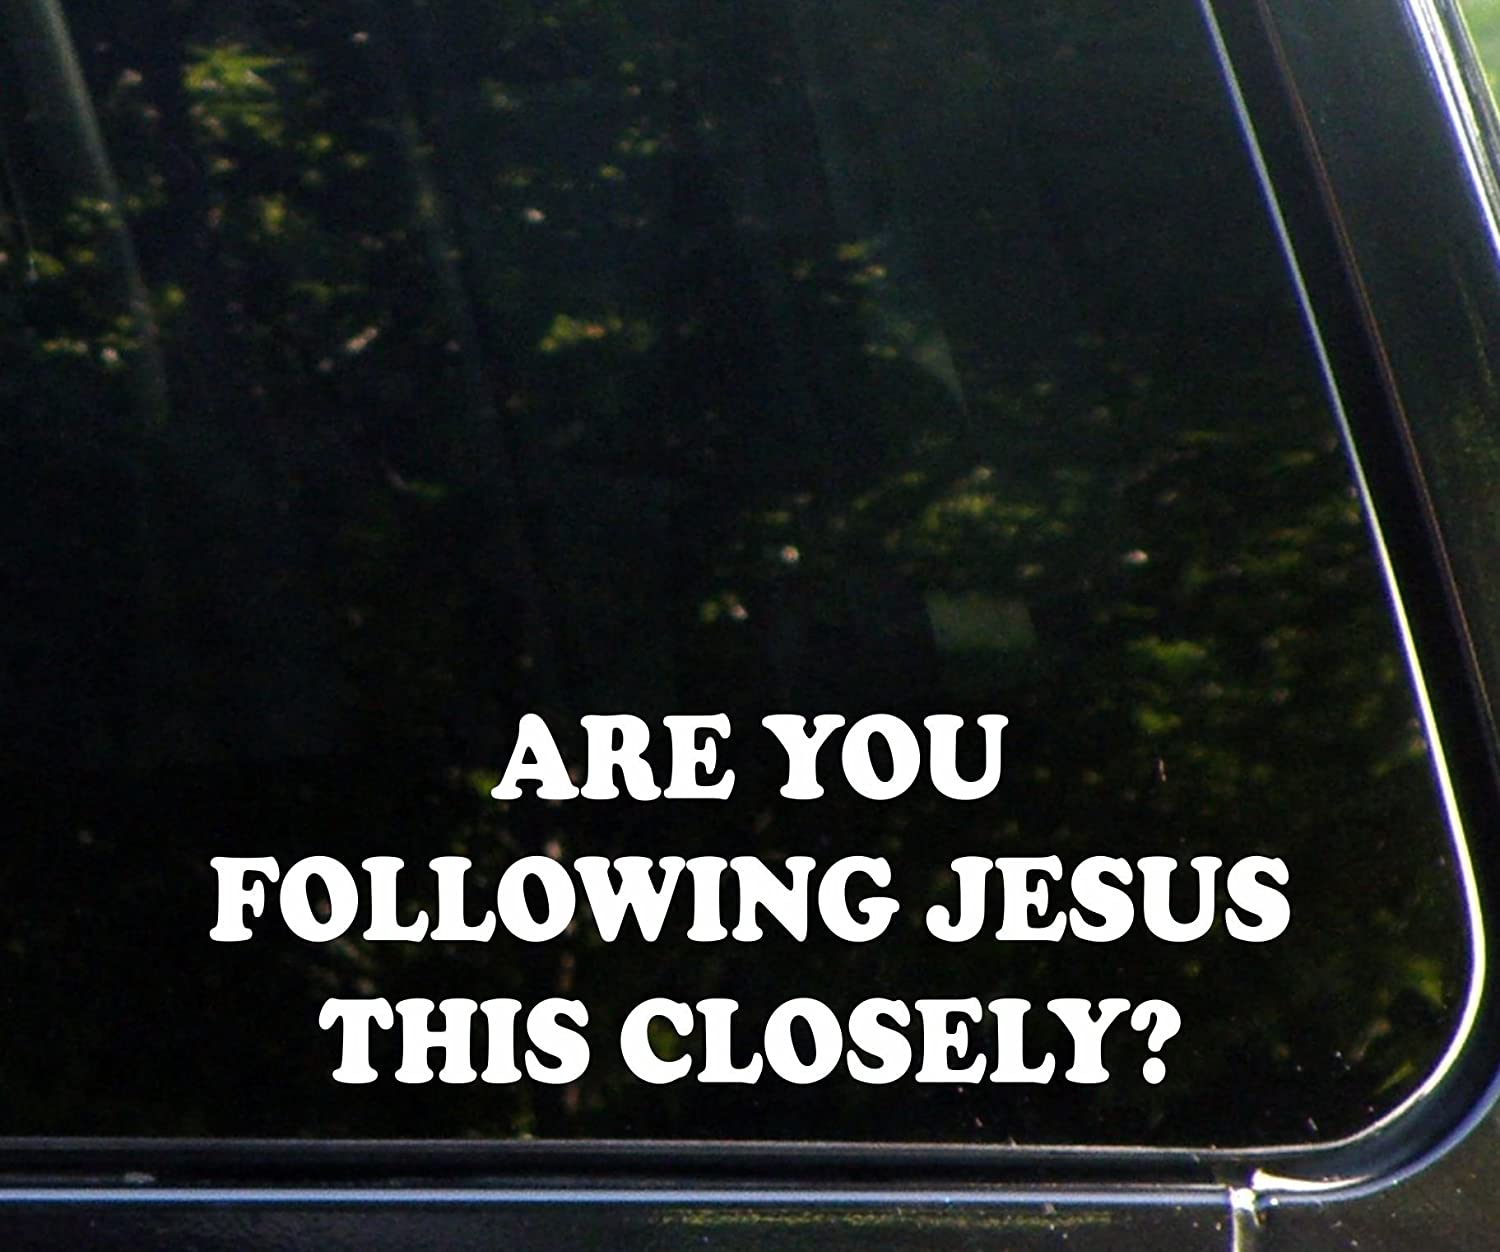 Are You Following Jesus This Closely? (9" x 3") Funny Die Cut Decal Sticker For Windows, Cars, Trucks, Laptops, Etc